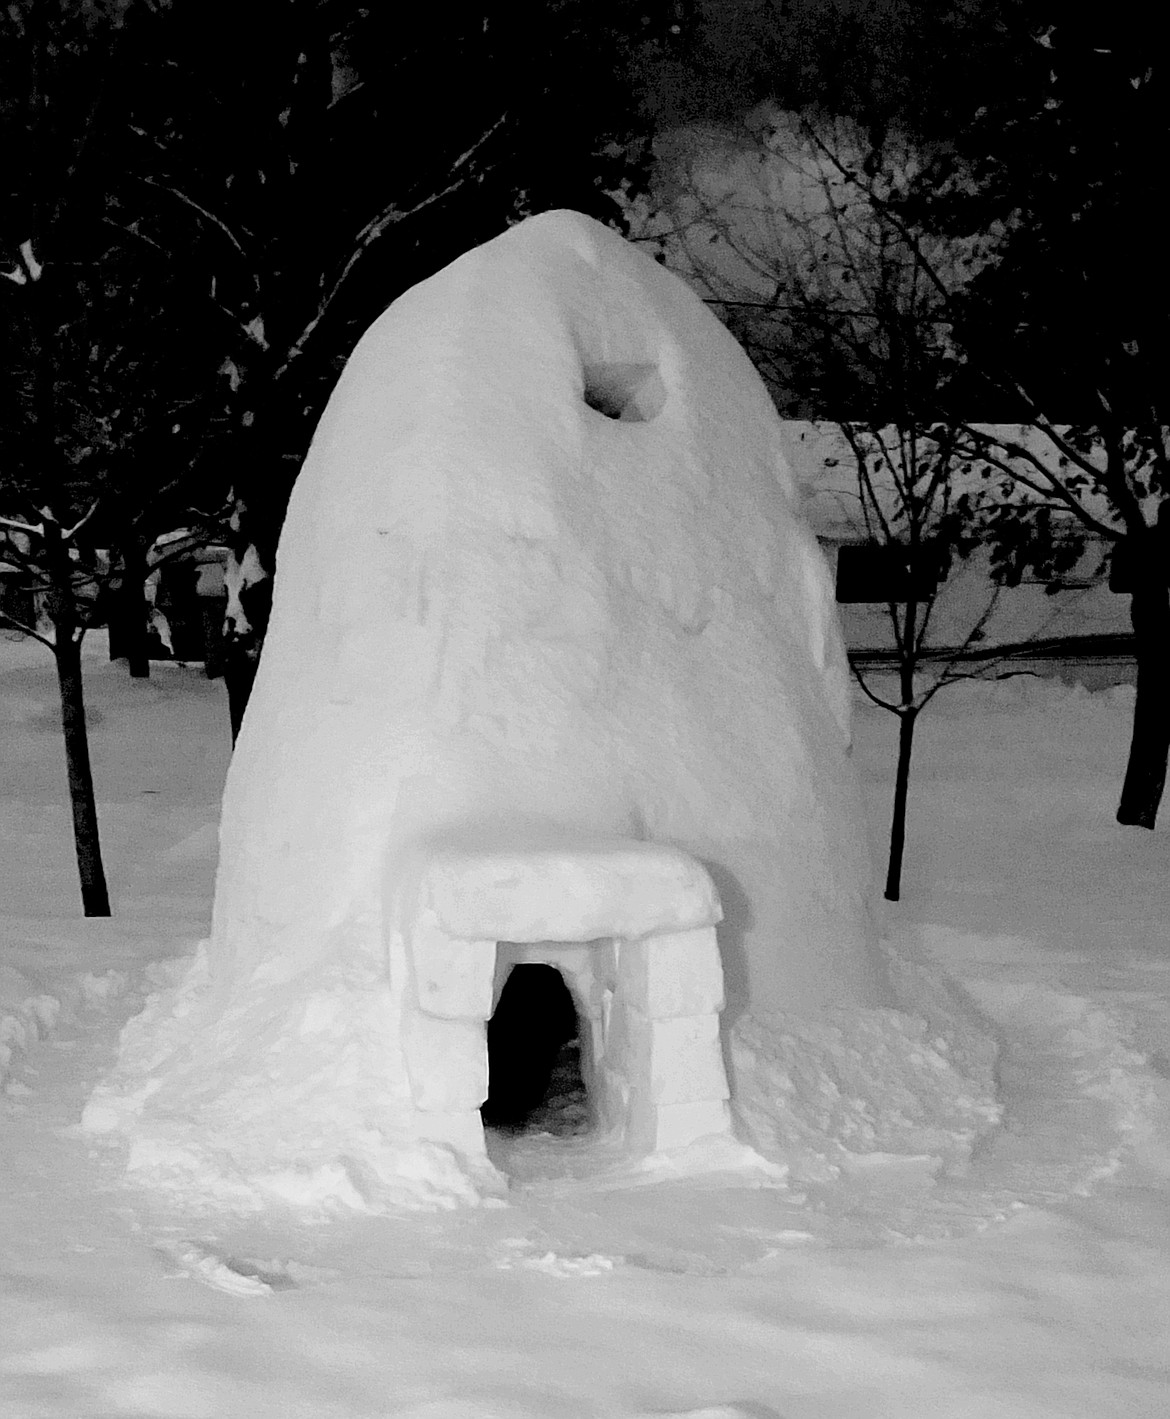 "Winter has given us plenty of cold and snow for this year's igloo. It ended up being 8 feet wide and 10 feet tall on the inside. East 12th Ave, Post Falls." (Photo by Gary Lake)